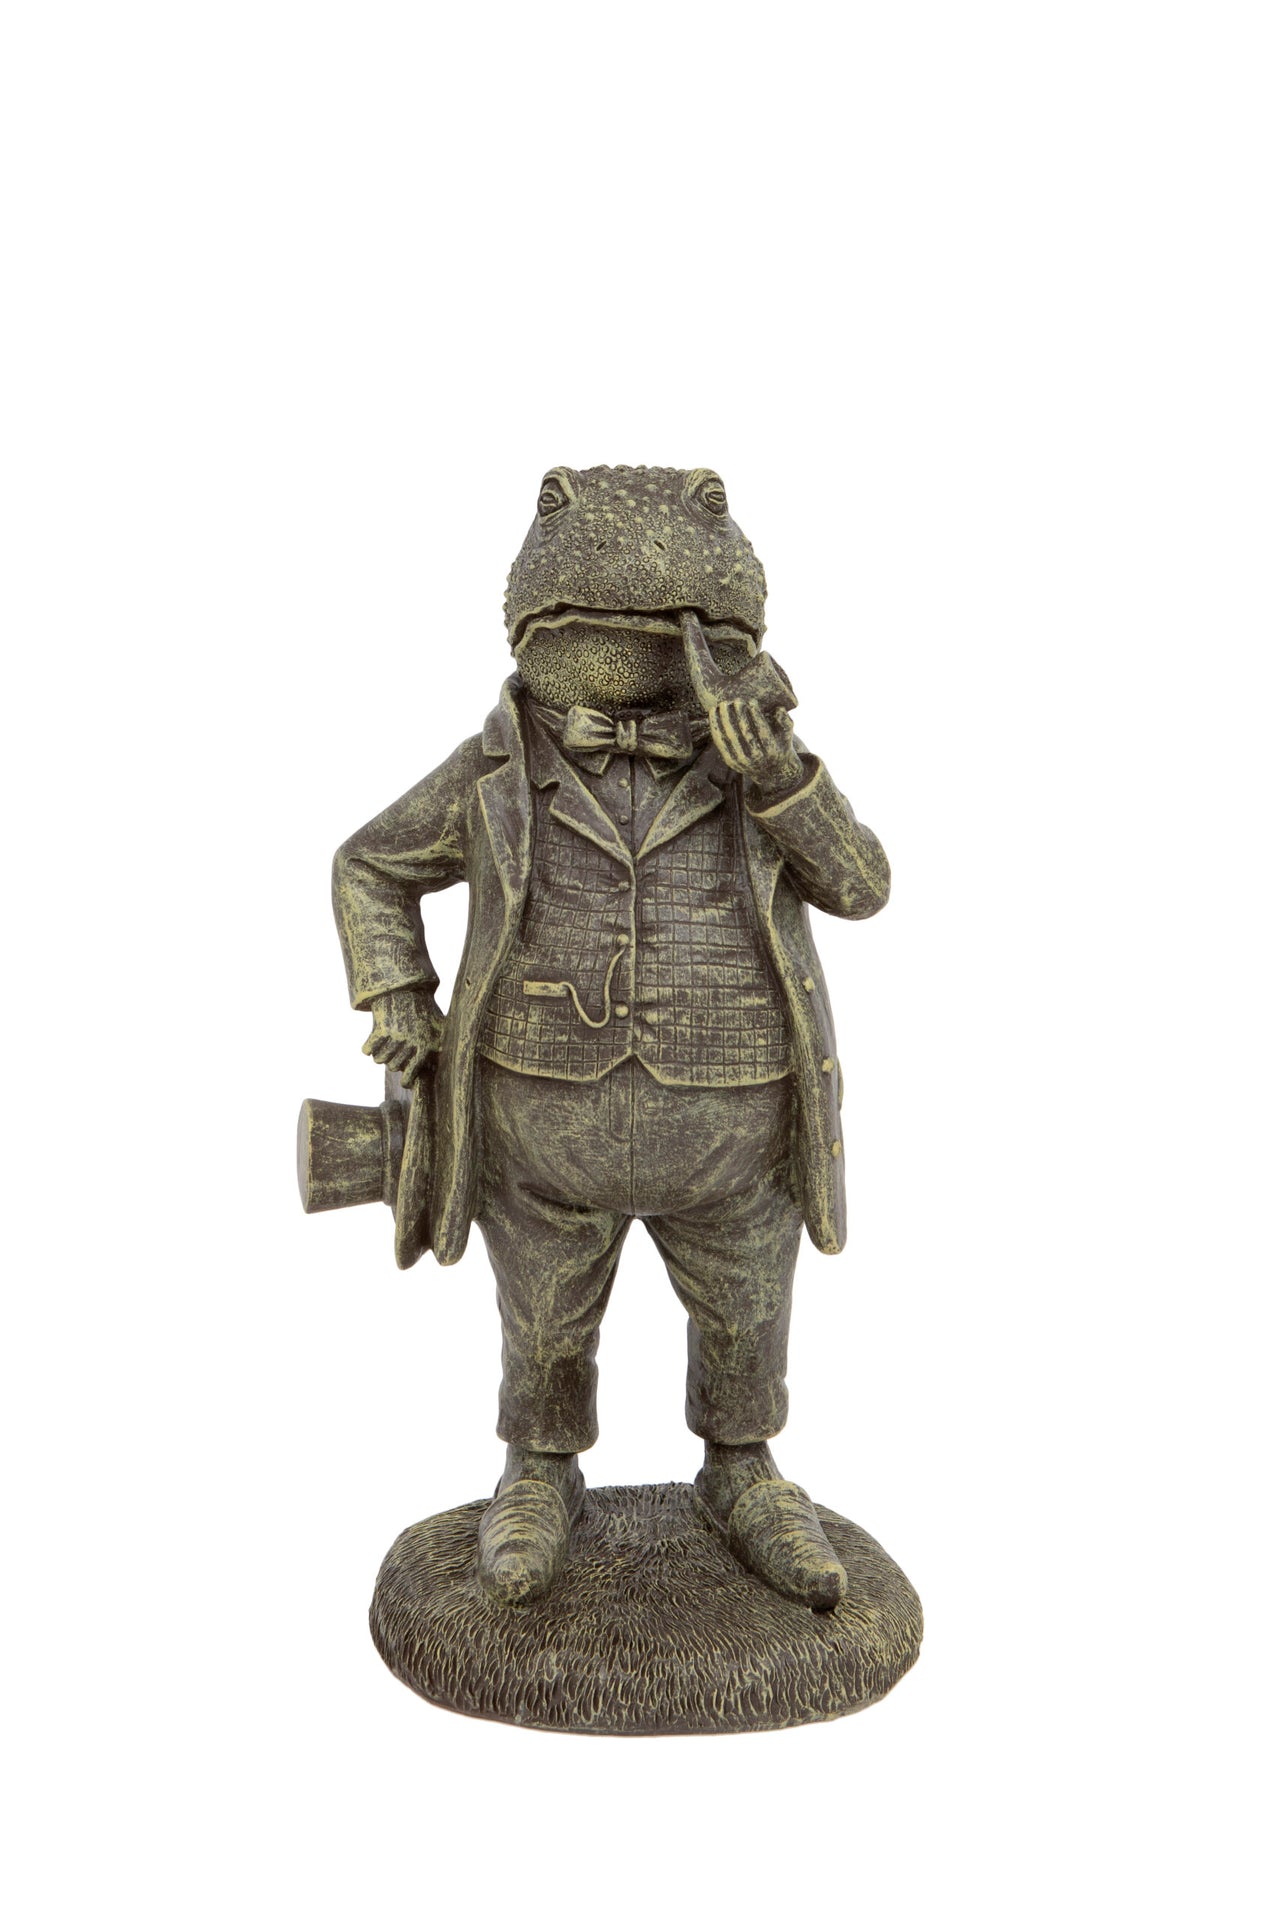 London Ornaments Mr. Toad Character Statue